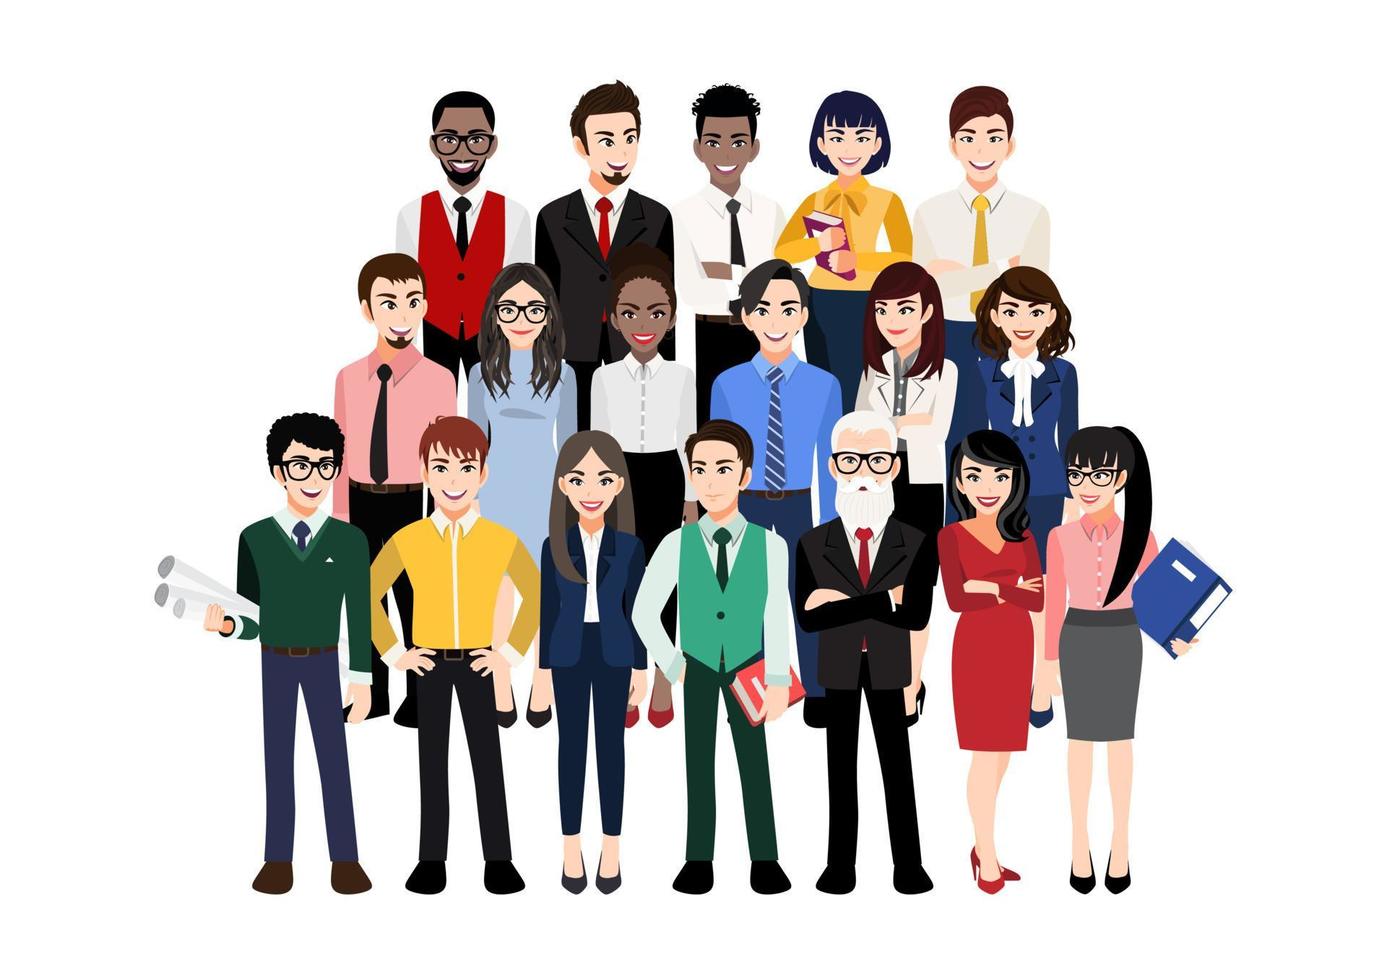 Cartoon character with modern business team. Vector illustration of diverse business people and company members, standing behind each other. Isolated on white.